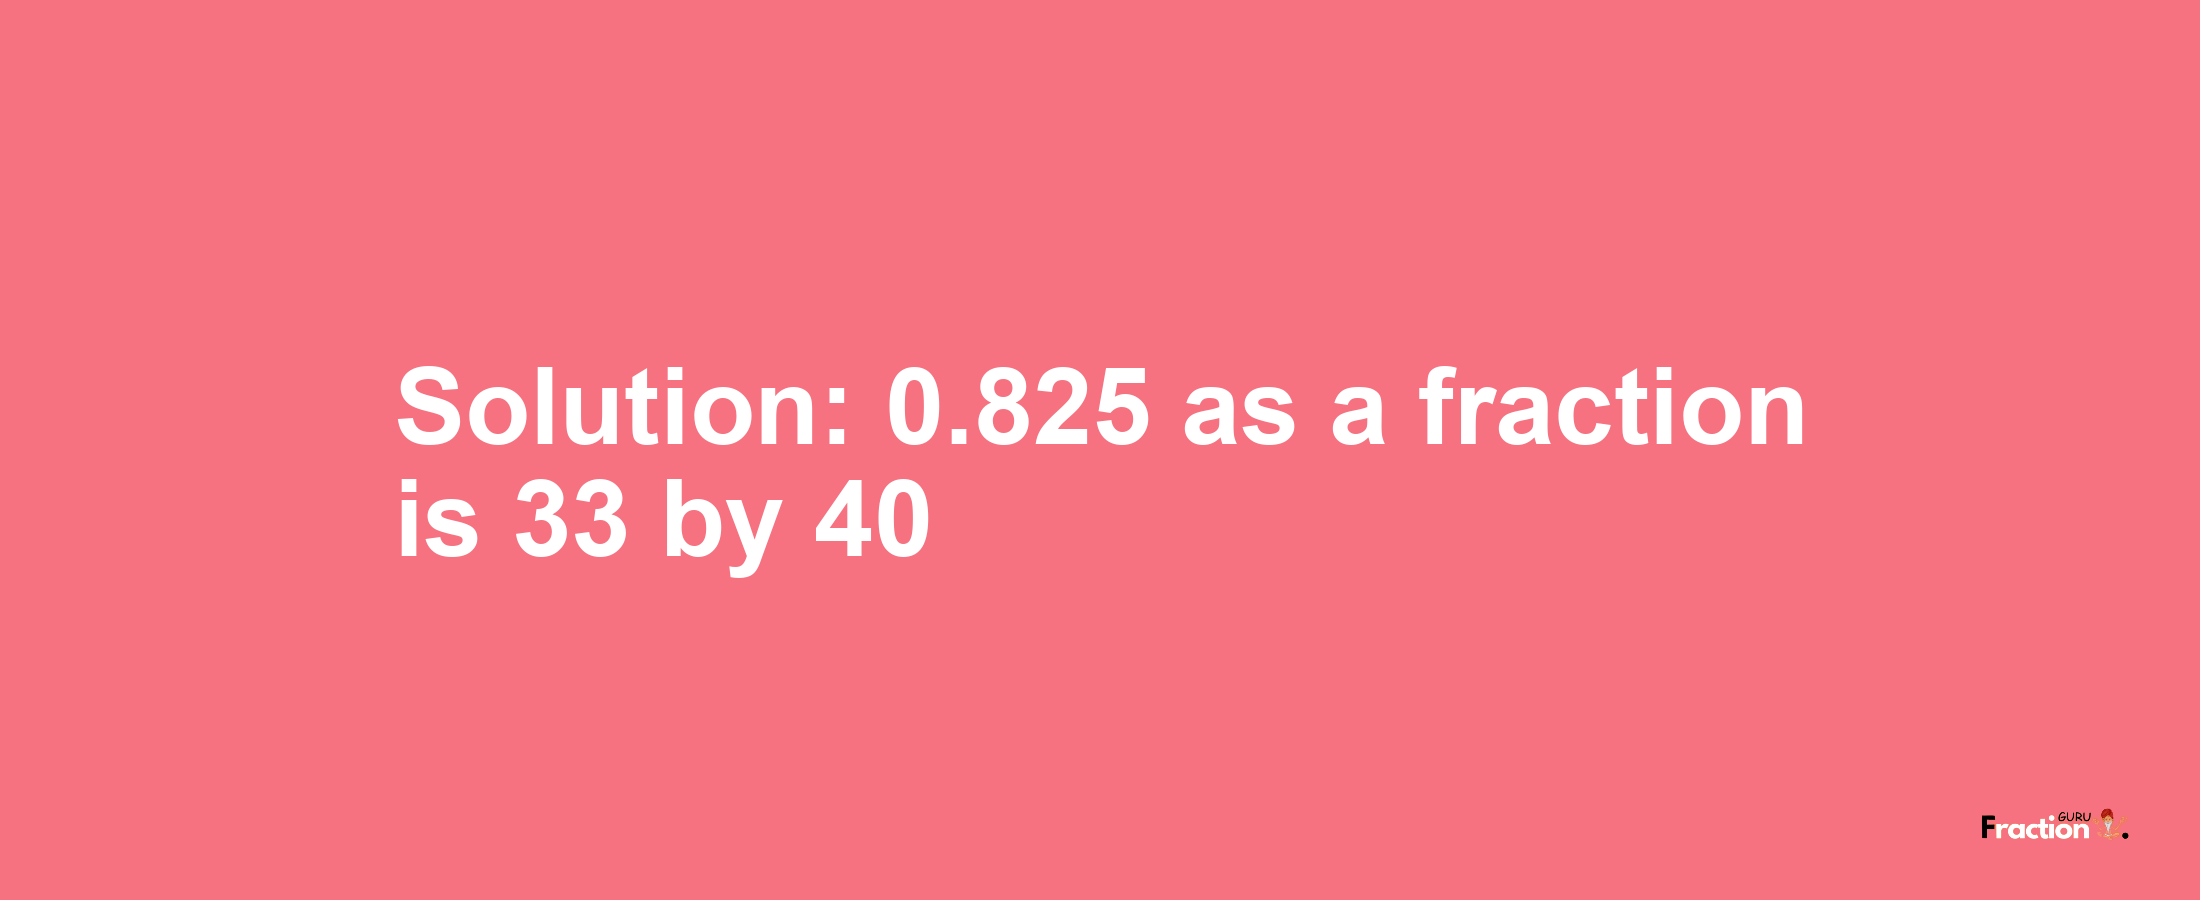 Solution:0.825 as a fraction is 33/40